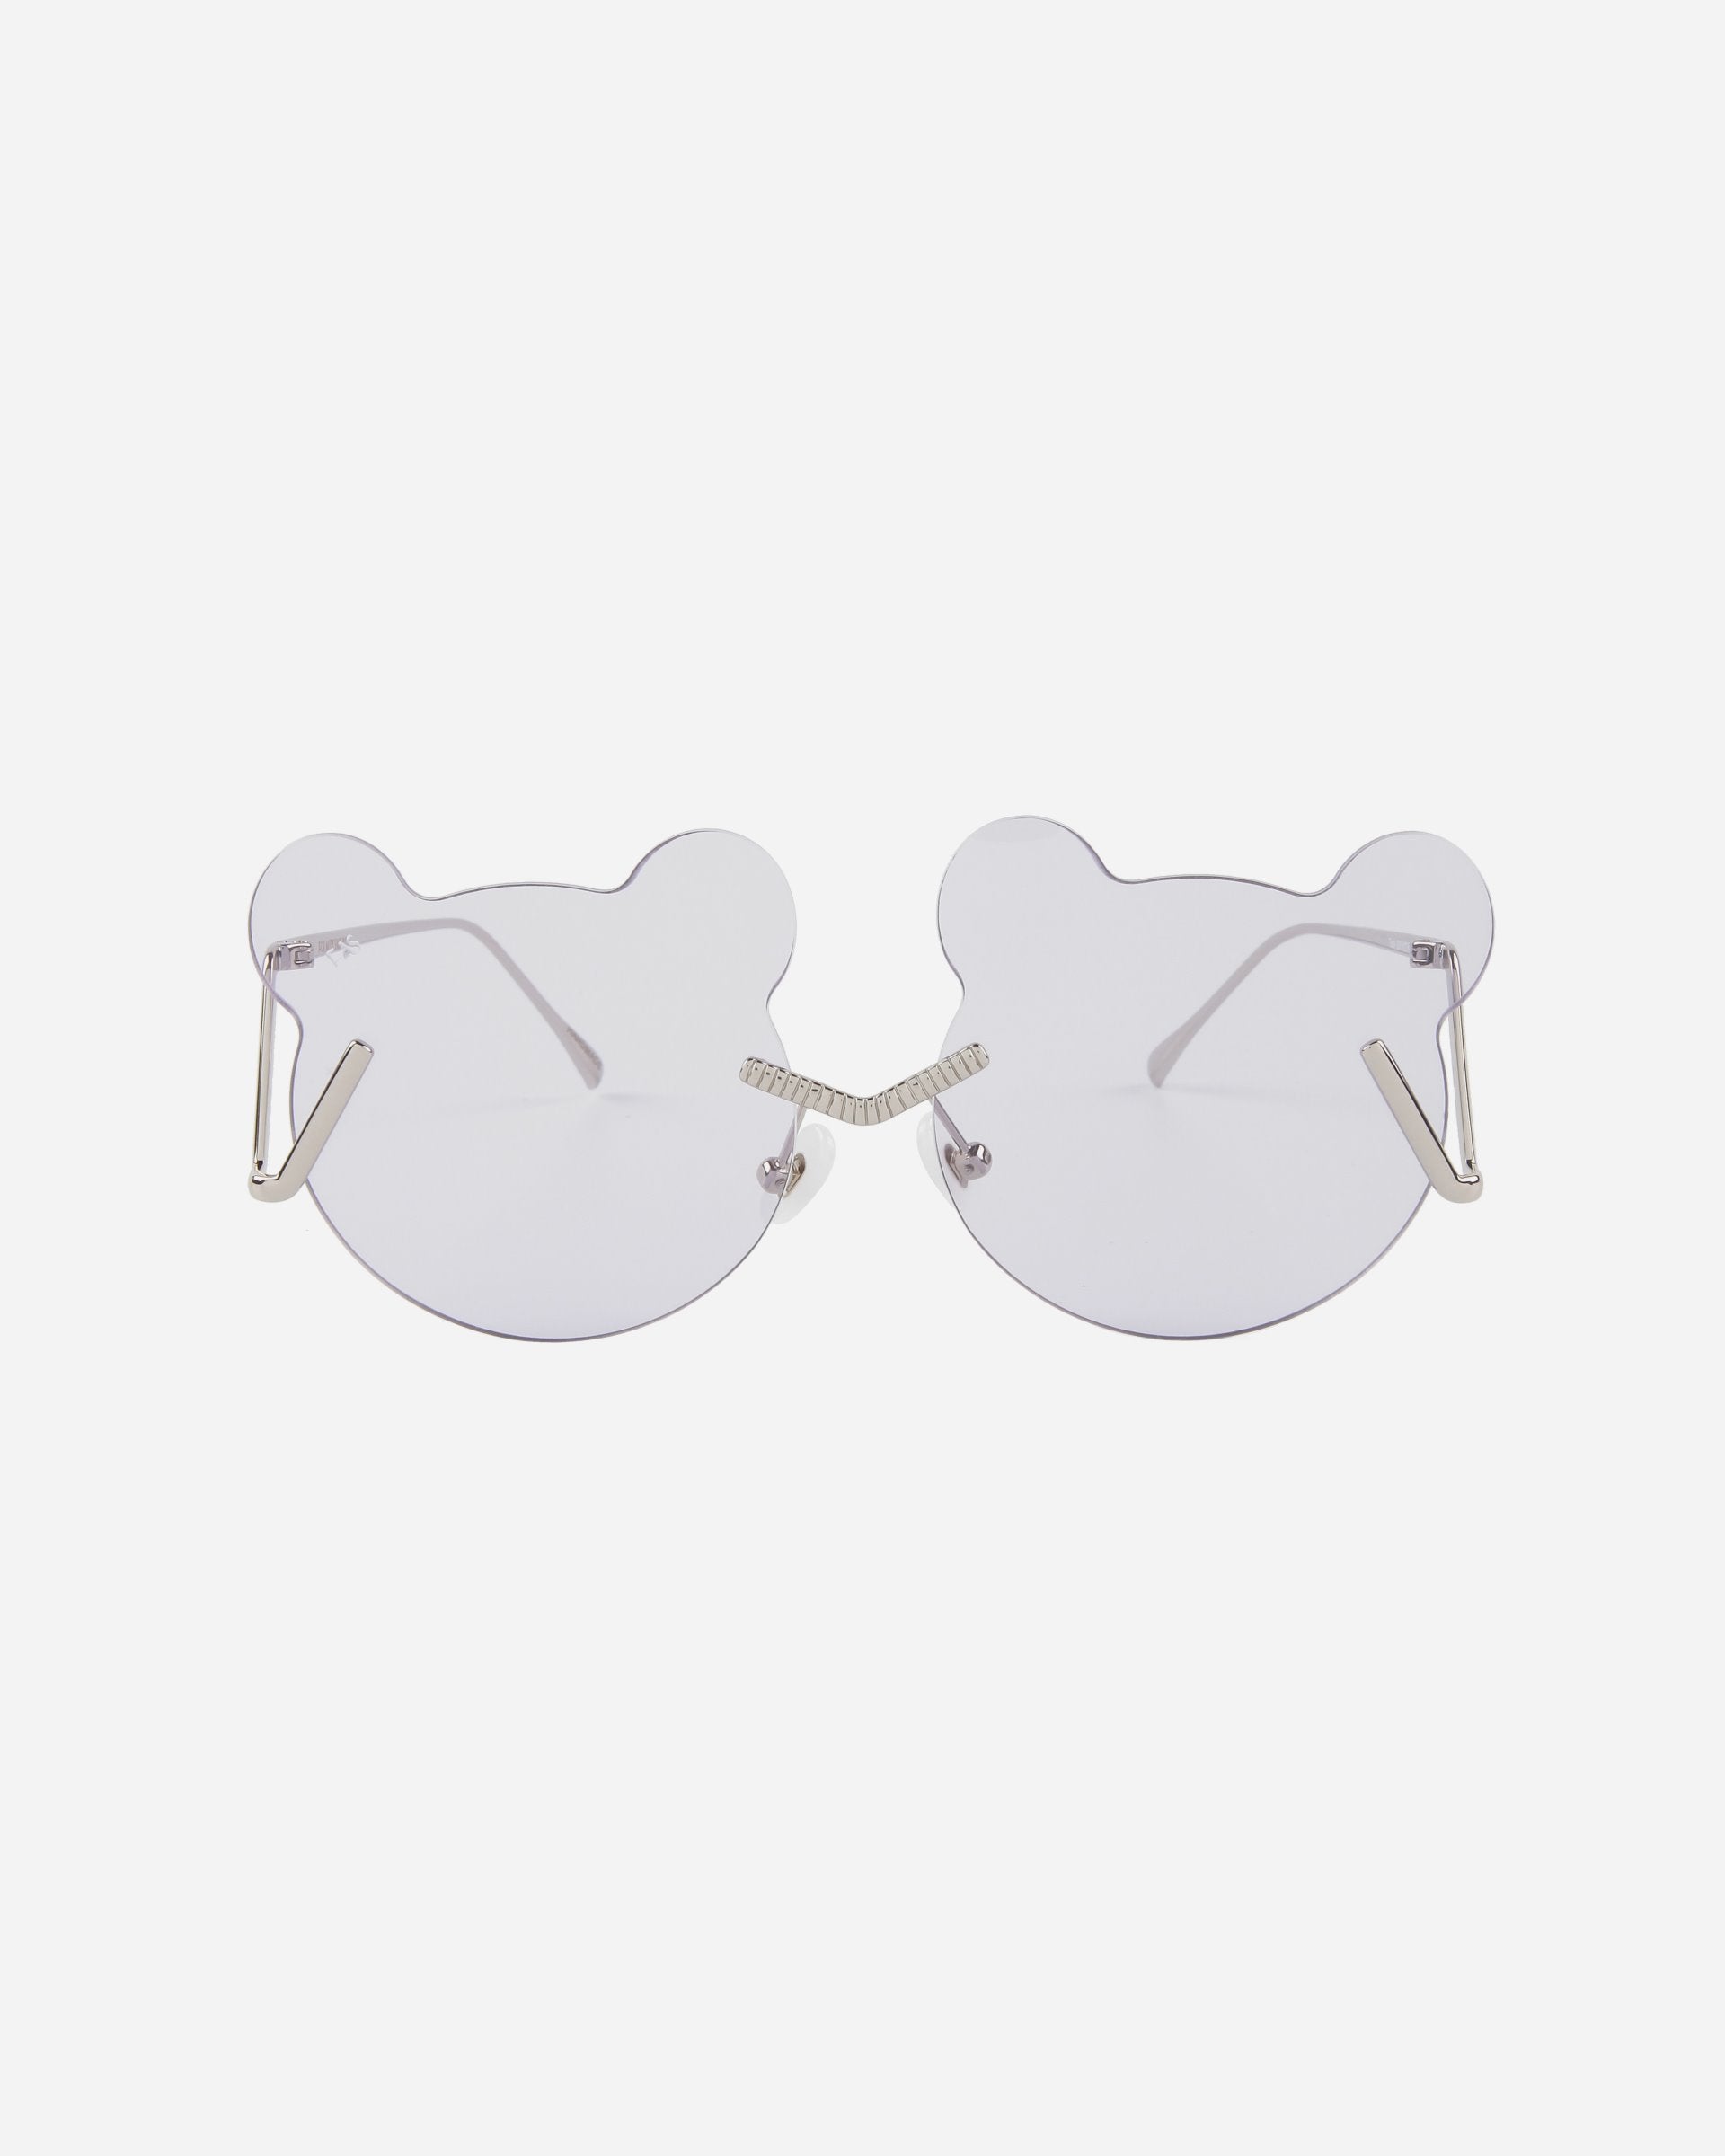 A pair of Teddy sunglasses by For Art&#39;s Sake® with lenses shaped like bear heads. The thin, metallic stainless steel frames and adjustable nosepads ensure a comfortable fit. The light, translucent shade offers UV protection, making the overall design playful and whimsical yet functional.